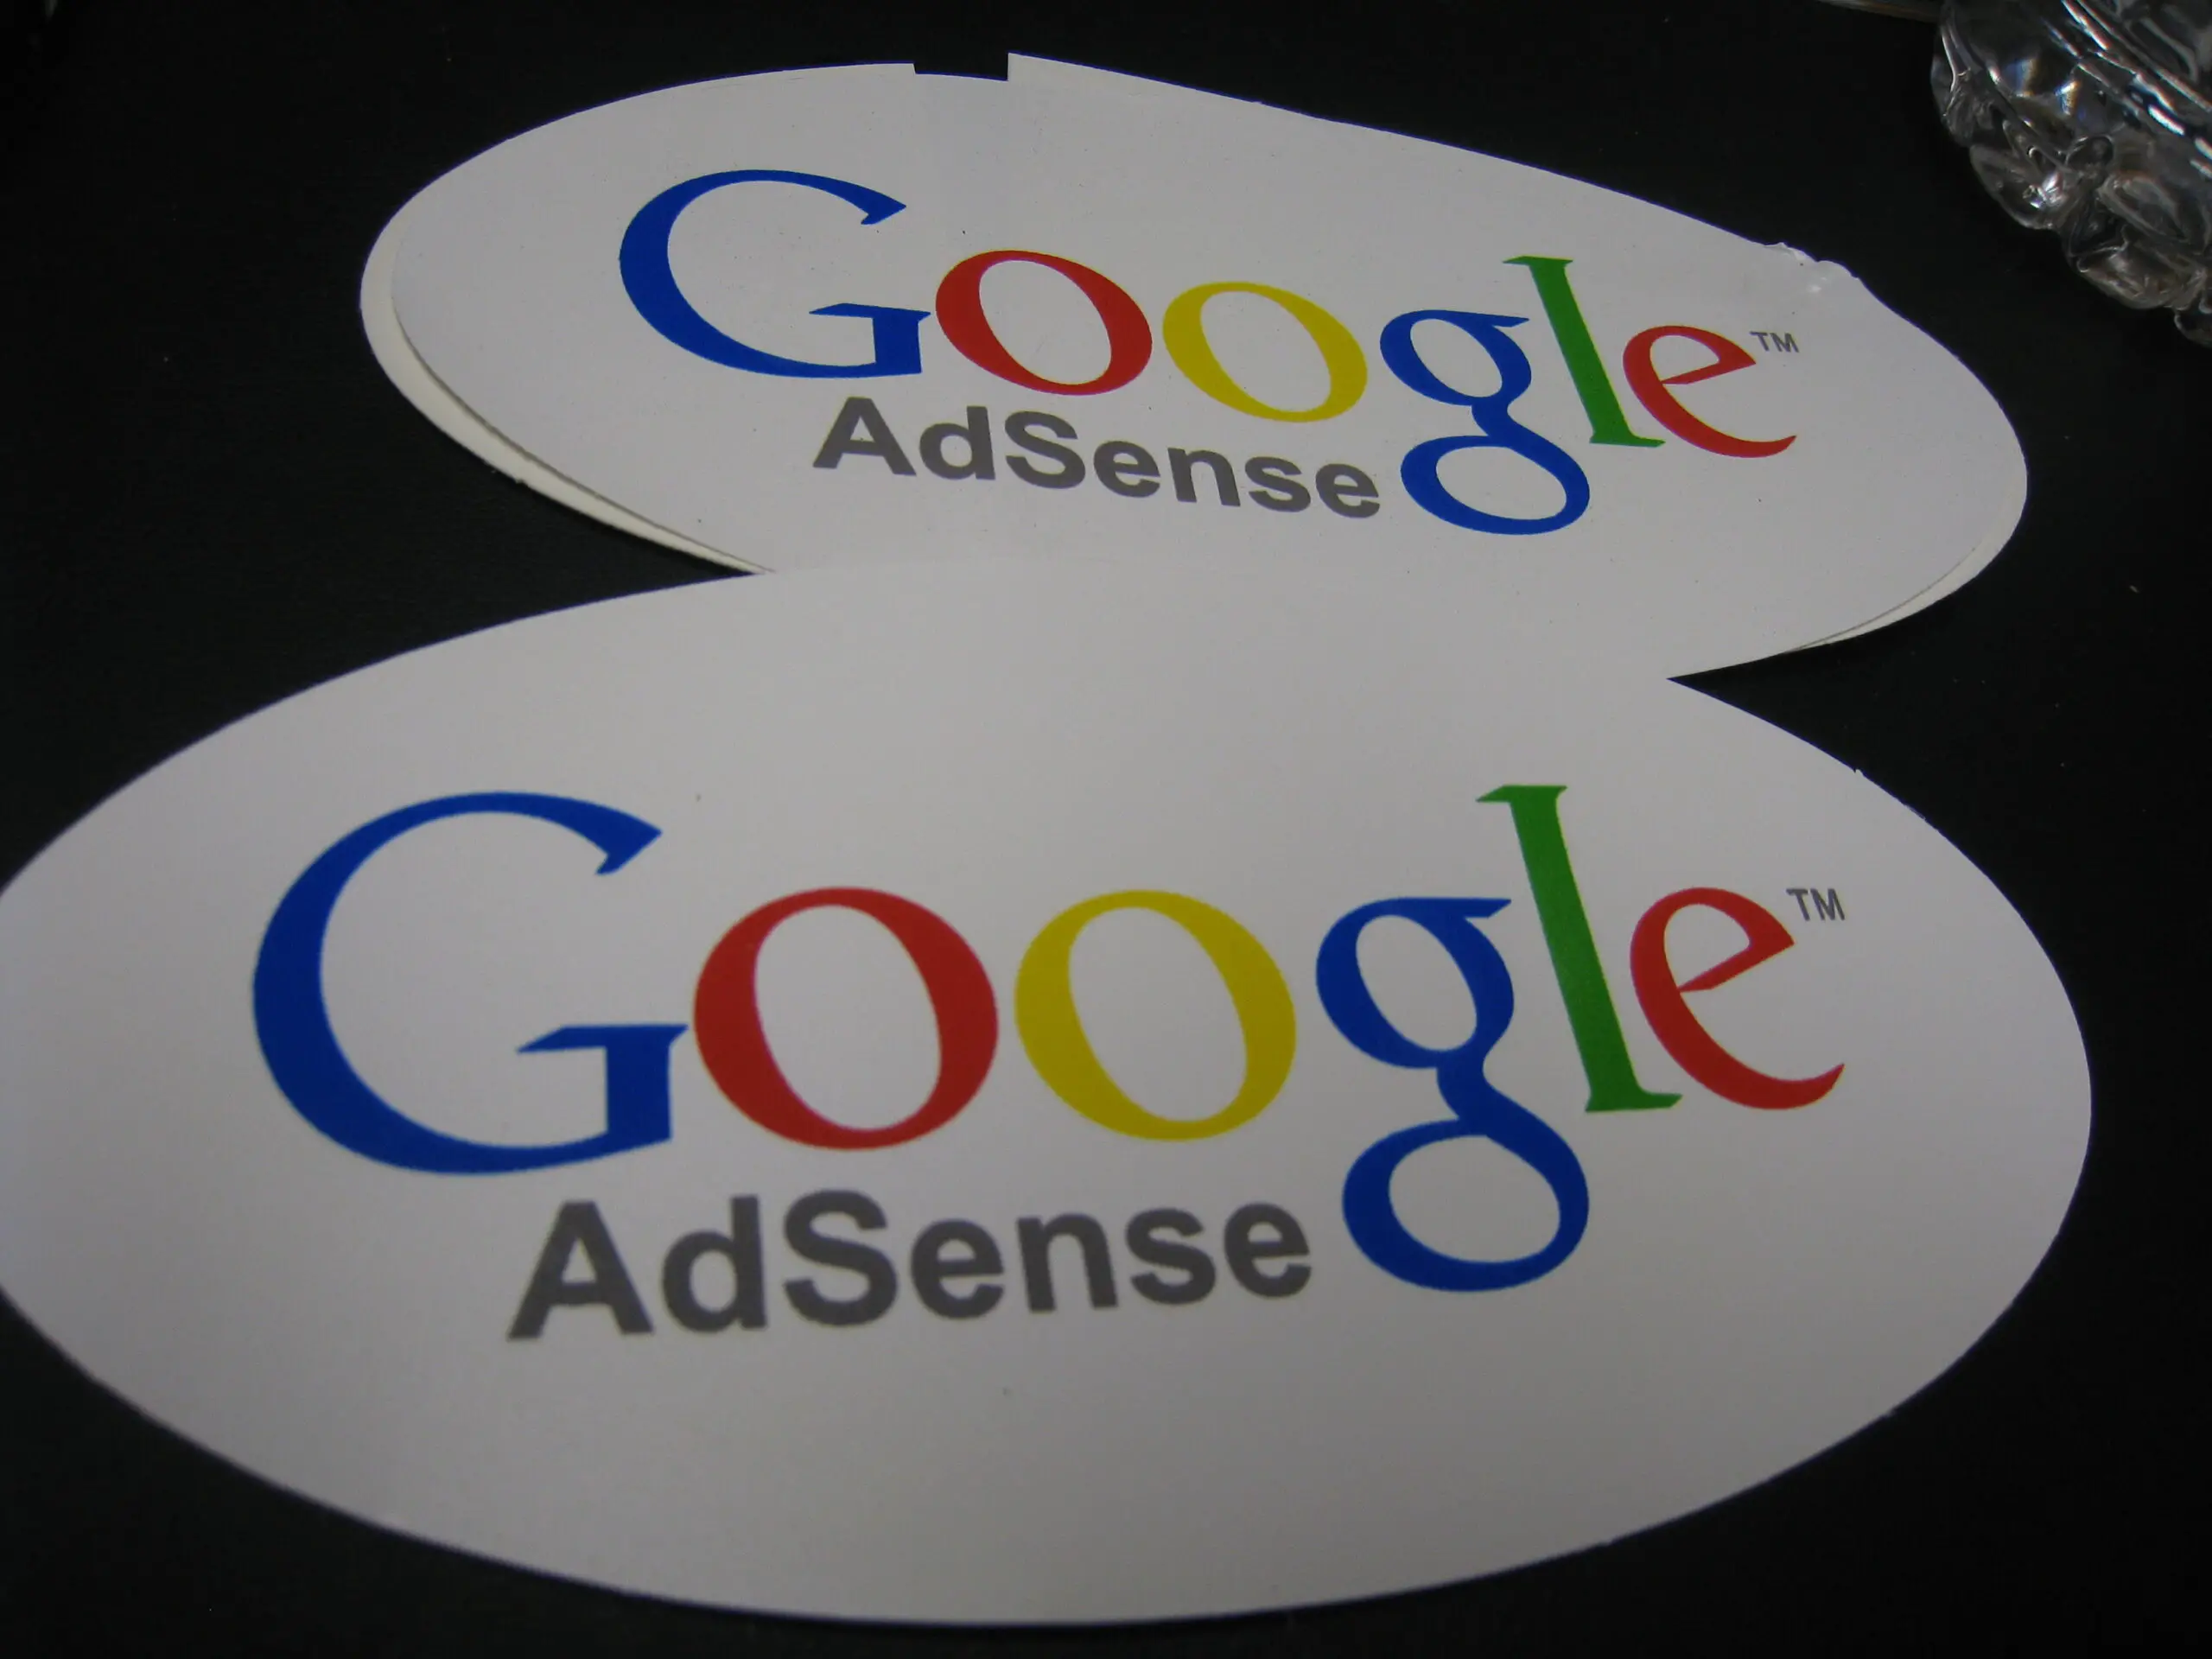 Make Money With Google AdSense Without a Website-Ultimate Guide 2023